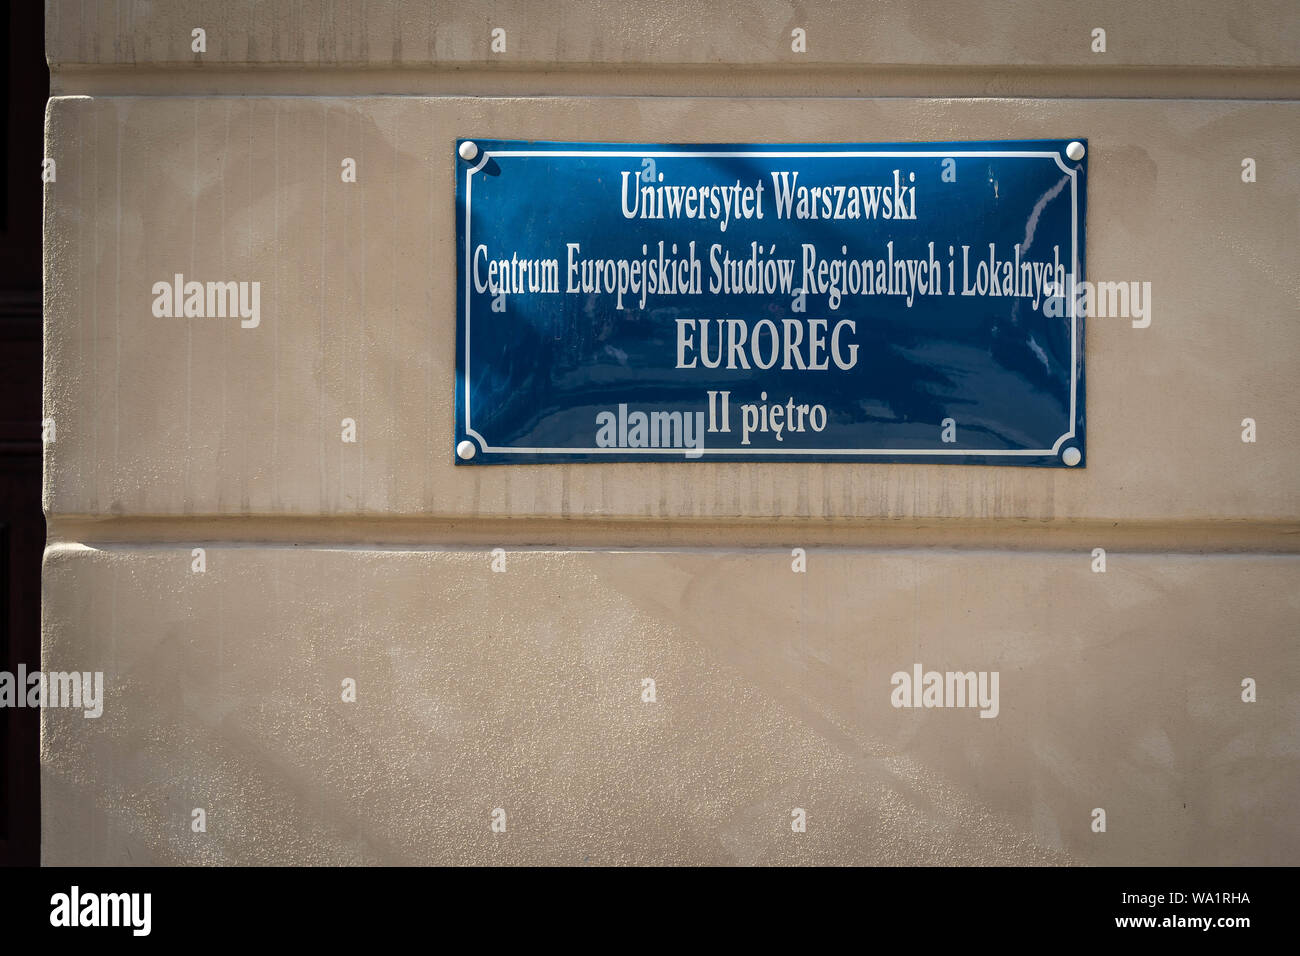 Warsaw, Poland - August 2019: Sign at the Centre for European Regional and Local Studies (EUROREG) in Warsaw. 'II pietro' means 'second floor' in poli Stock Photo